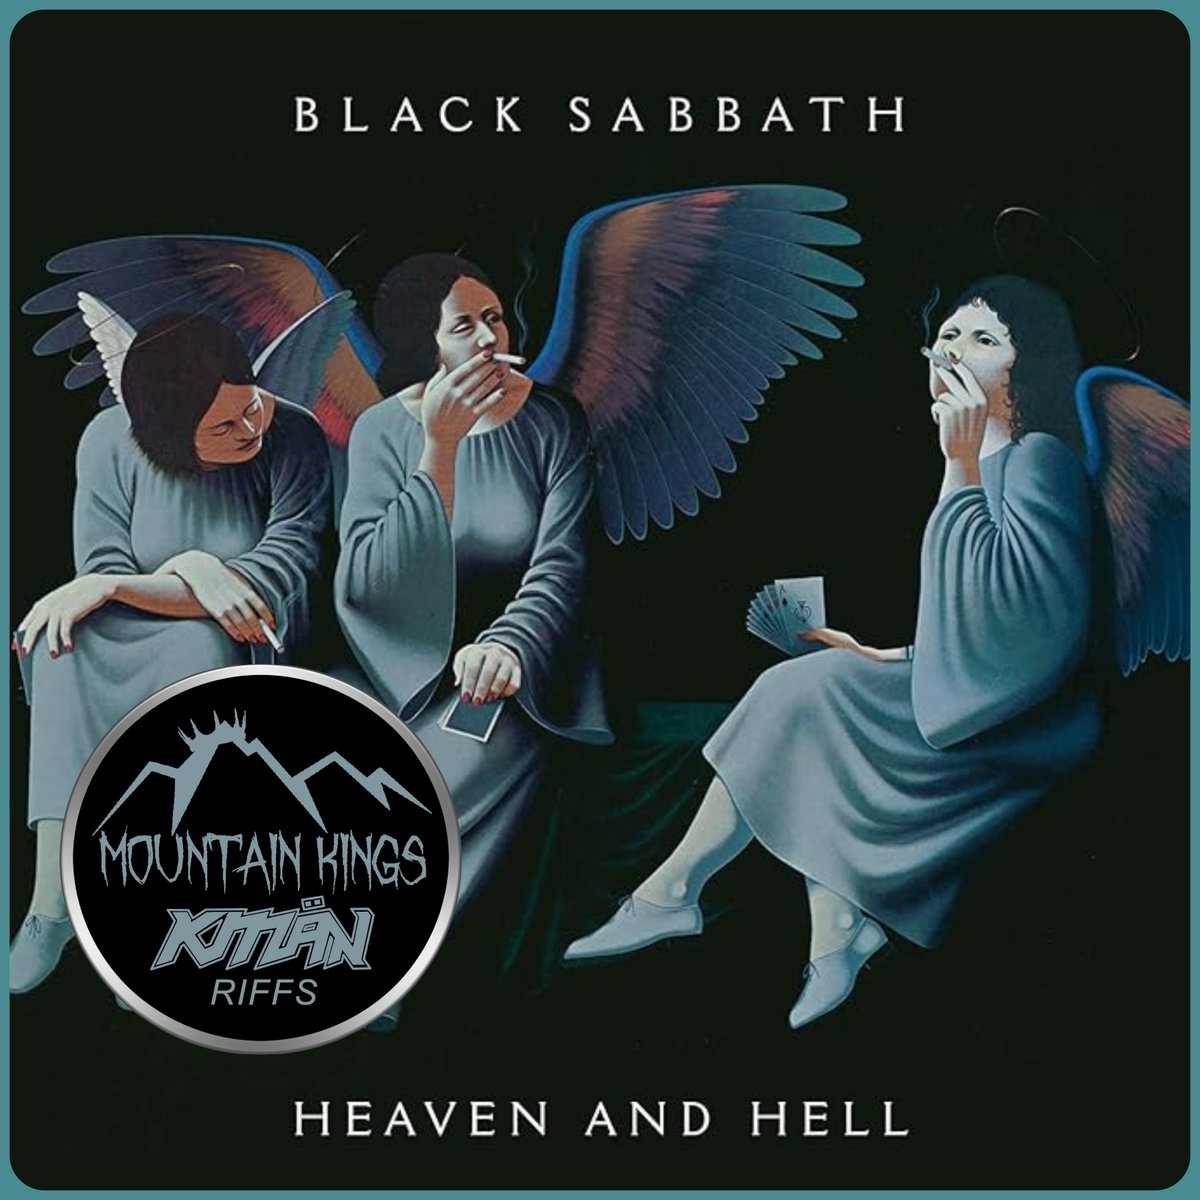 👑MOUNTAIN KINGS #44👑 Submission: BLACK SABBATH - Heaven and Hell (1980) 🇬🇧 9 albums in and the addition of RJ Dio seemed almost like fate! This was a band reborn, reinvented and in 1980 there wasn't a whole lot that sounded like H&H. A masterful chemistry at play! #MK44👑